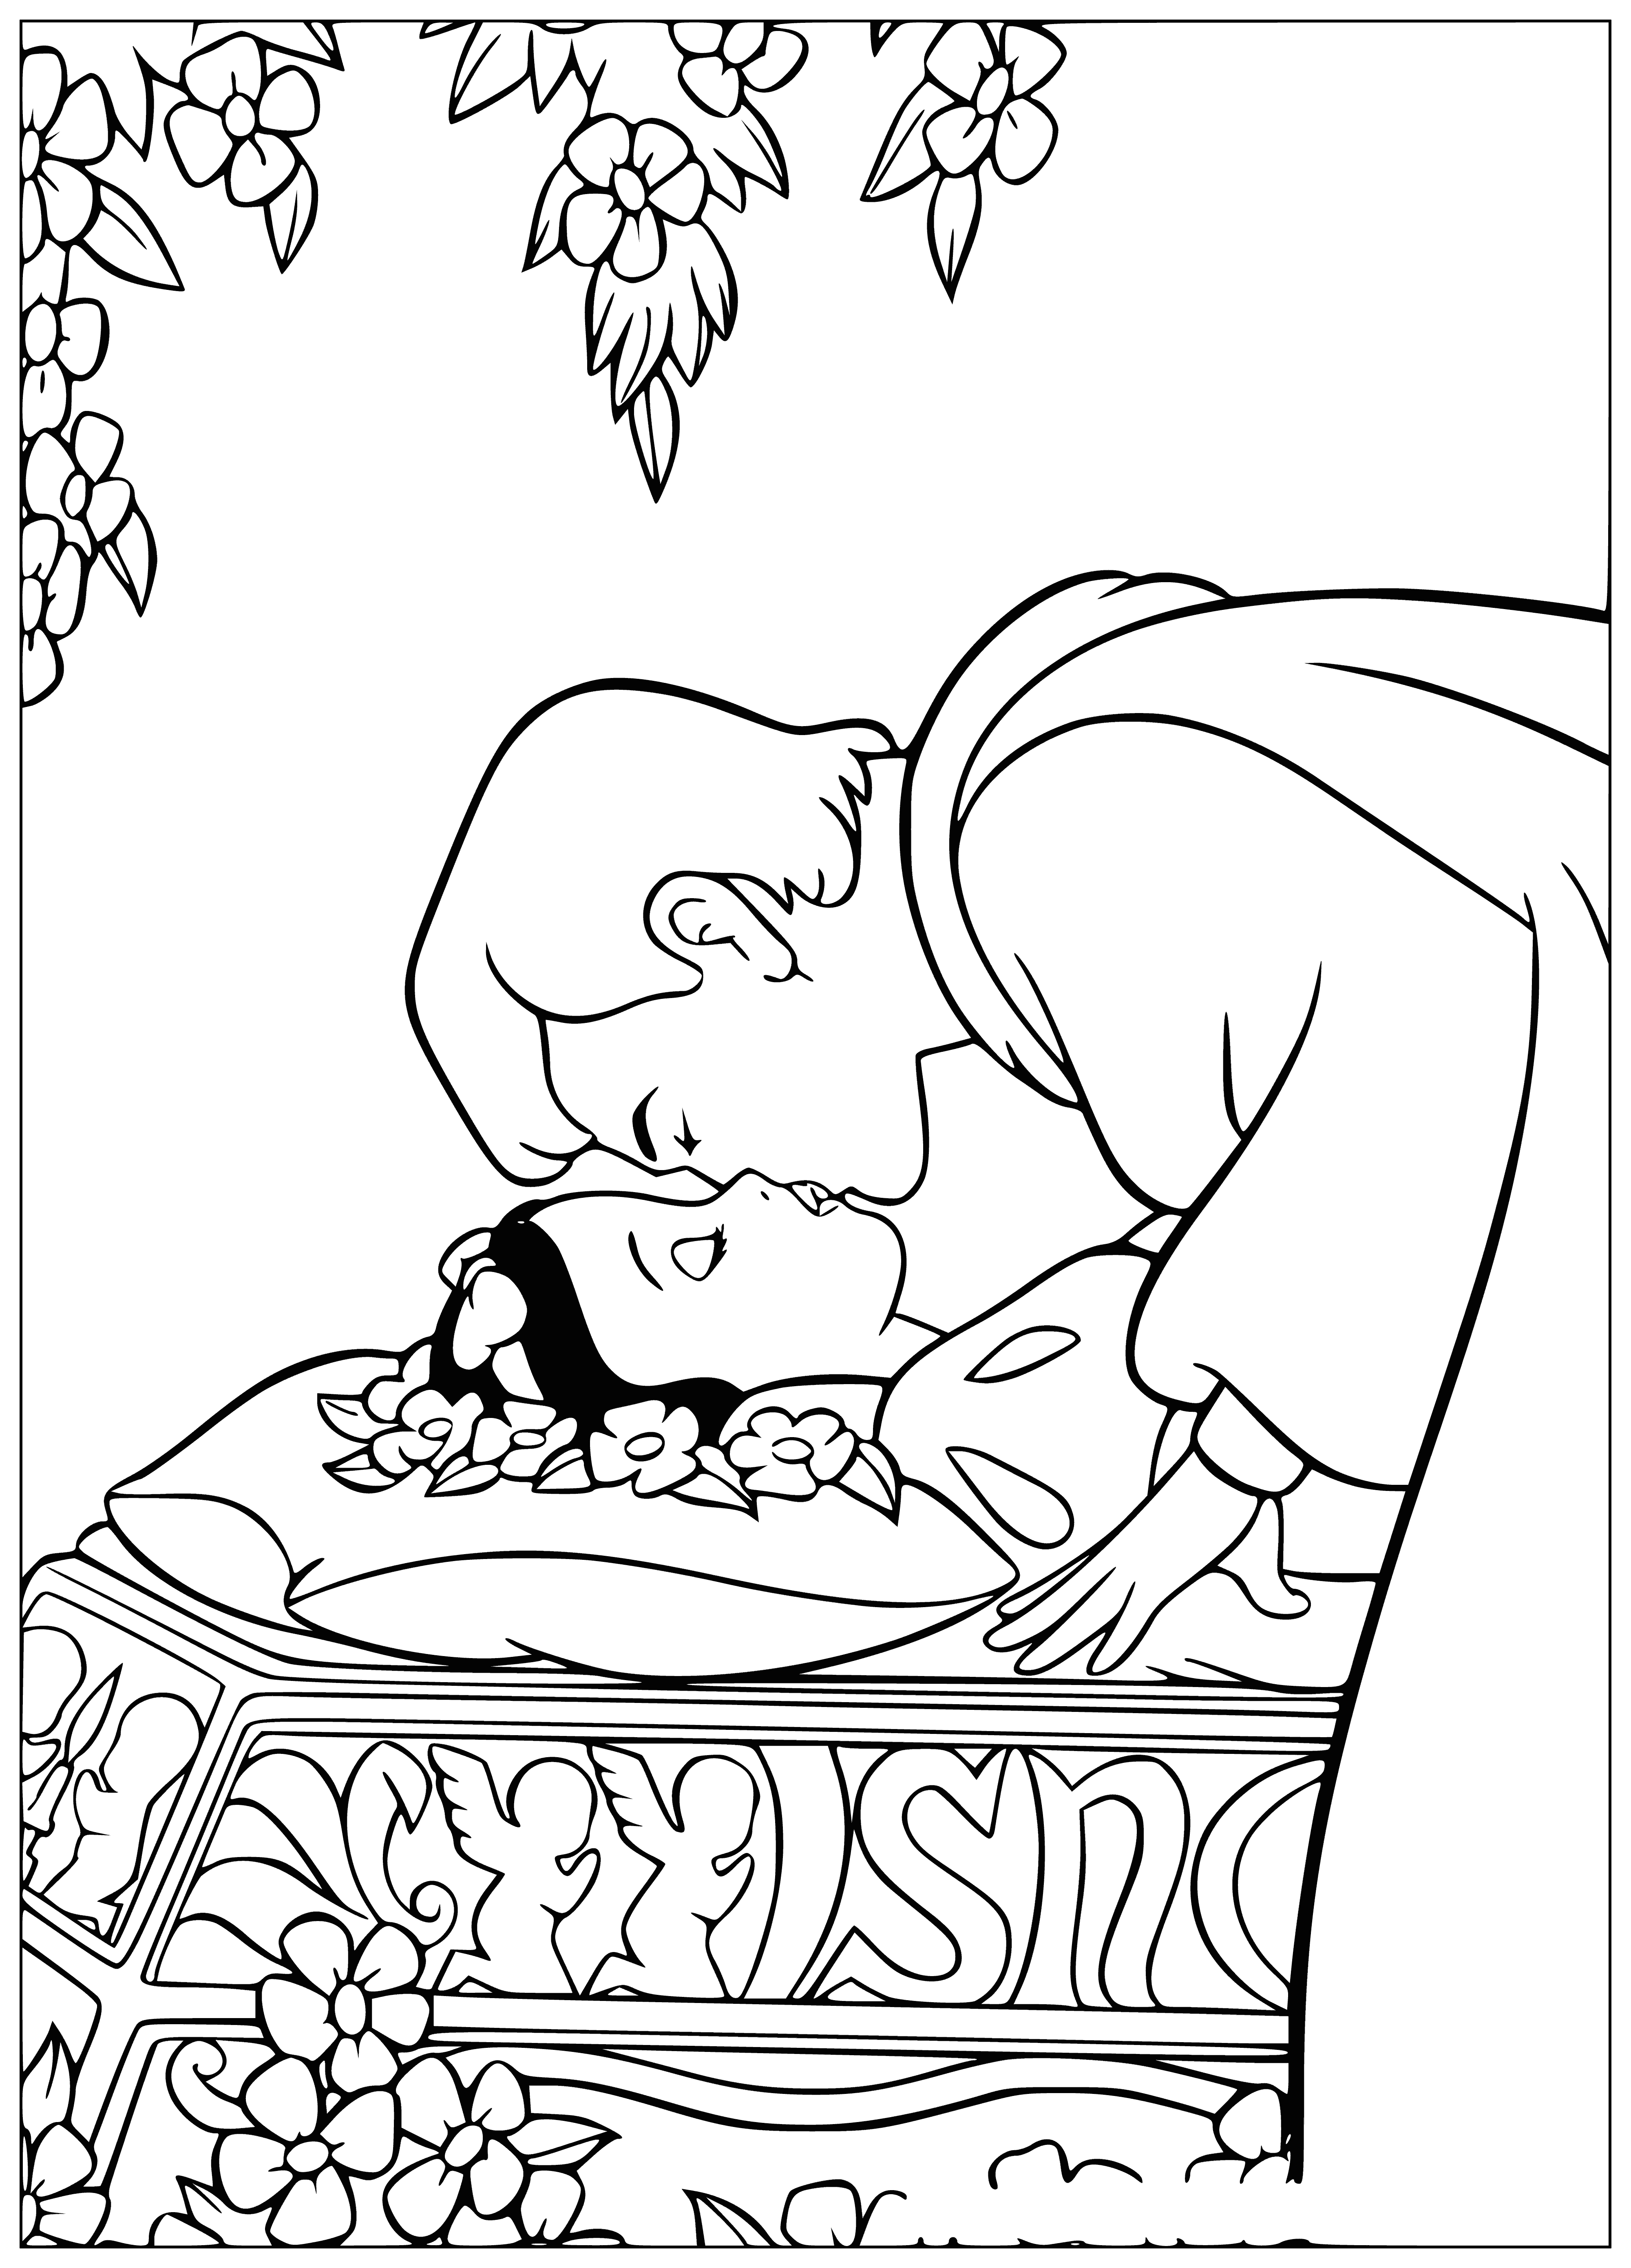 Kiss the prince coloring page